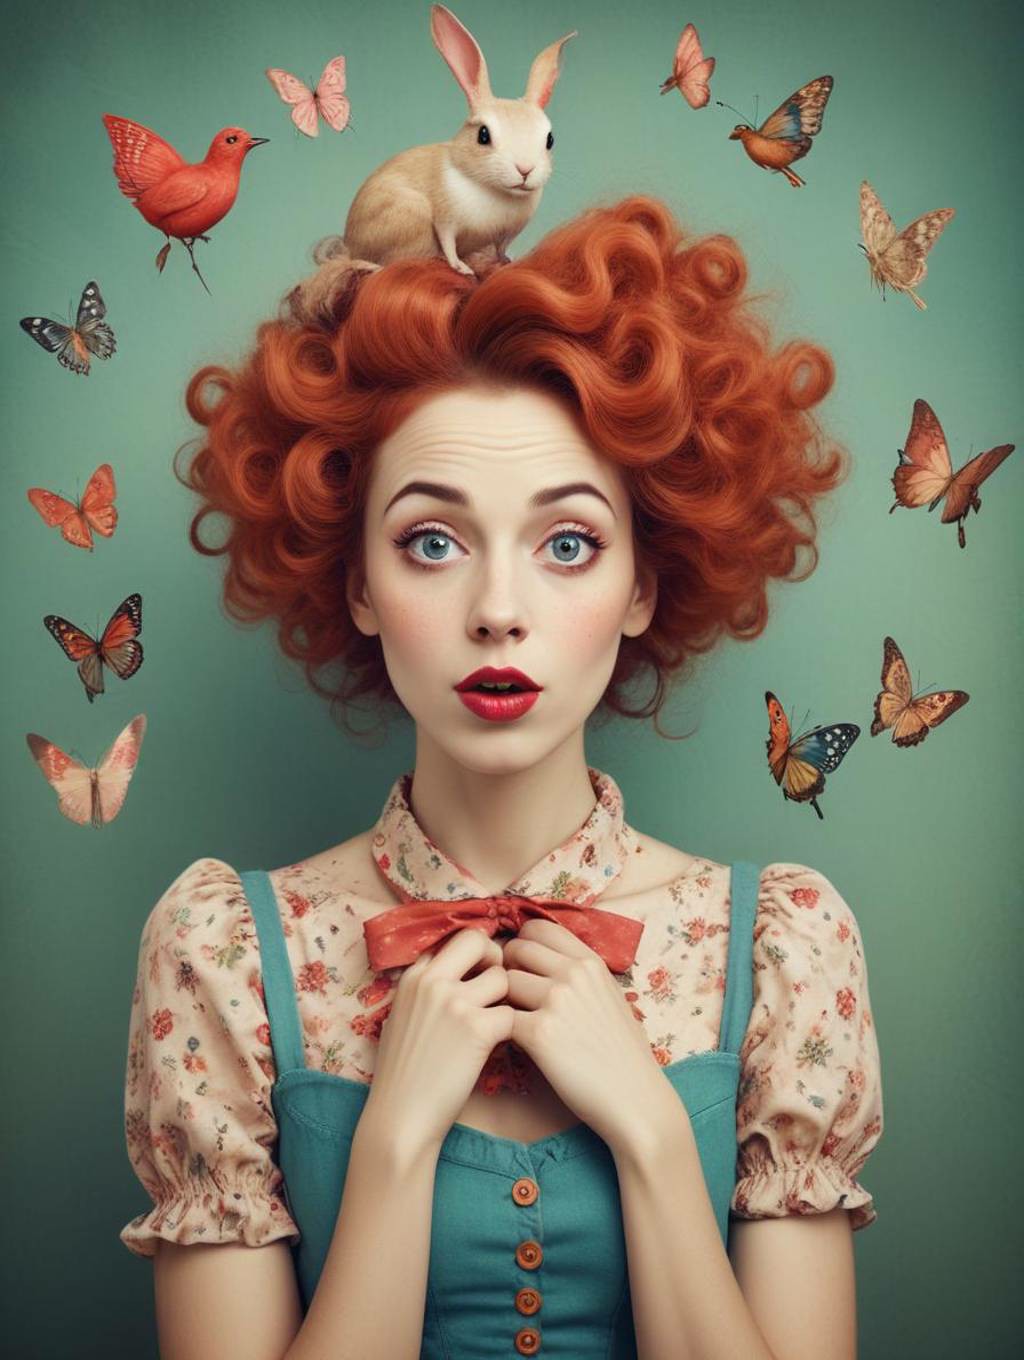 Whimsical & Quirky Women: Art Frames & Portrait Photography-Theme:6